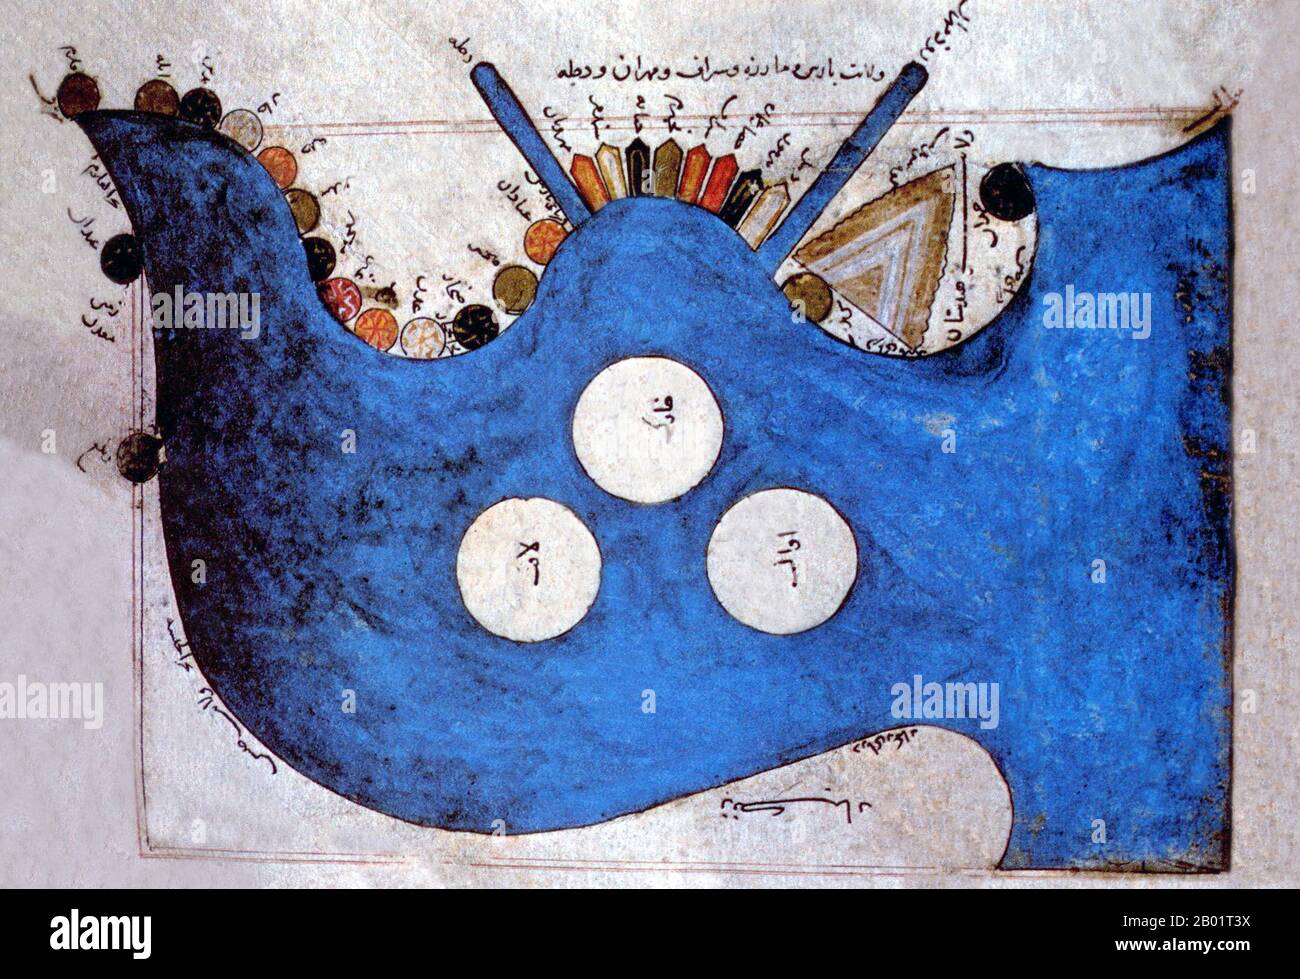 Iran/Persia: A map of the Persian/Arab Gulf and Arabian Sea based on a 10th century map by Abu Ishaq Ibrahim al-Istakhri (850-957), c. 14th-15th century.  Abu Ishaq Ibrahim ibn Muhammad al-Farisi al Istakhri (aka Estakhri, i.e. from the city of Estakhr)  was a medieval Persian geographer in the 10th century.  Al-Istakhri's Arabic language works include Al-masaalik al-mamaalik ('Traditions of Countries') and Suwar al-Aqaaleem ('Shapes of the Climes'). Stock Photo